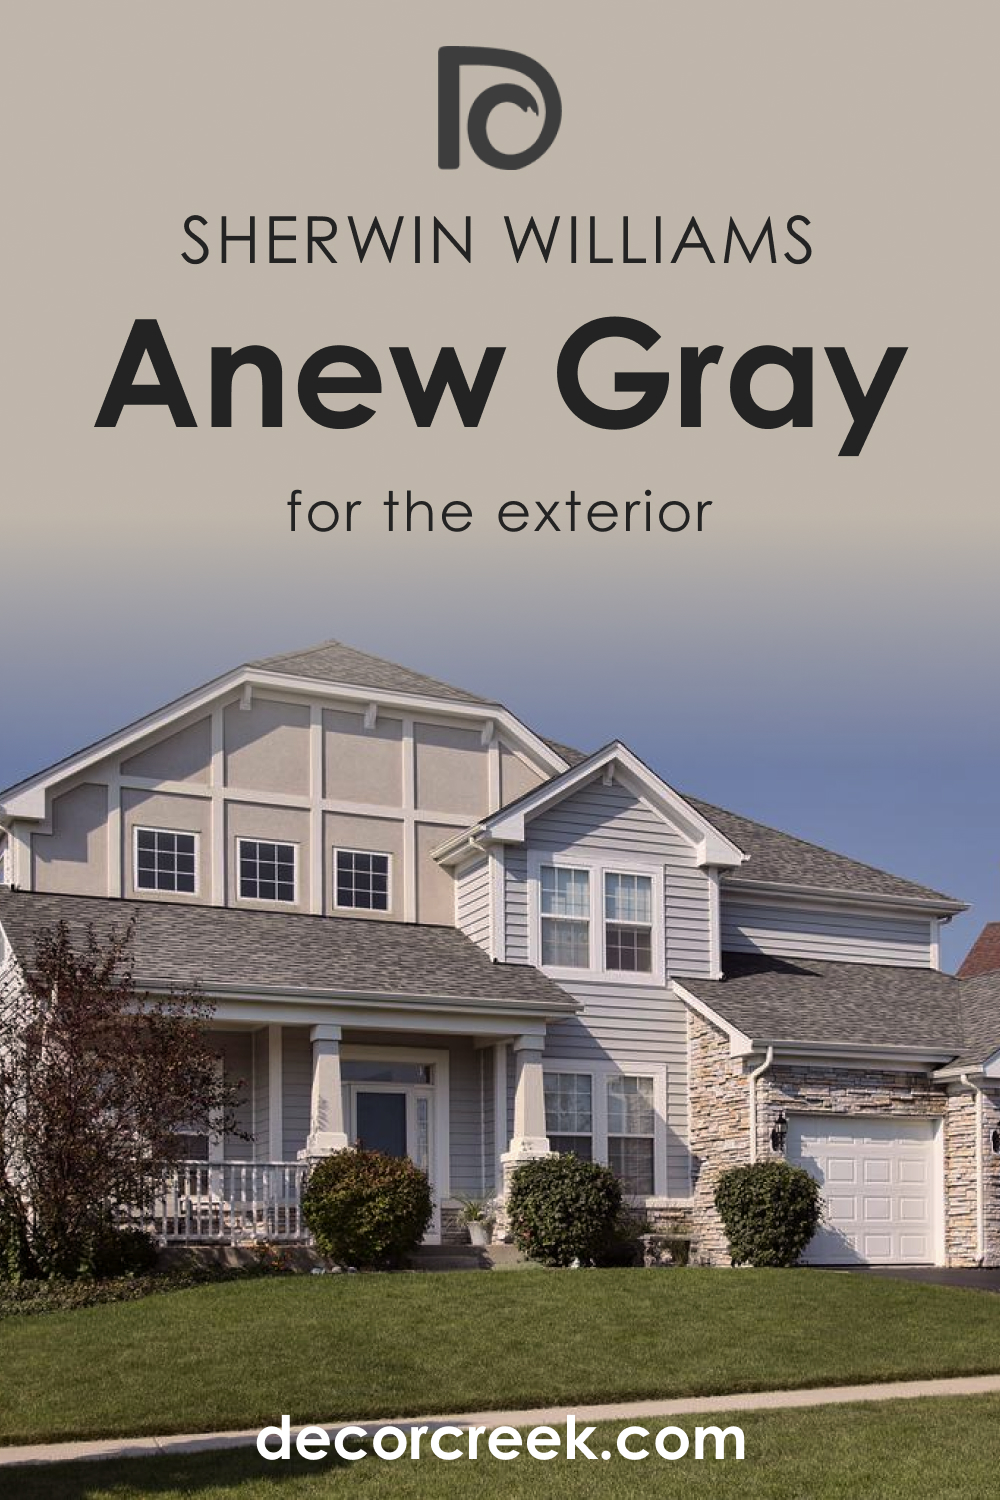 How to Use SW 7030 Anew Gray for an Exterior?